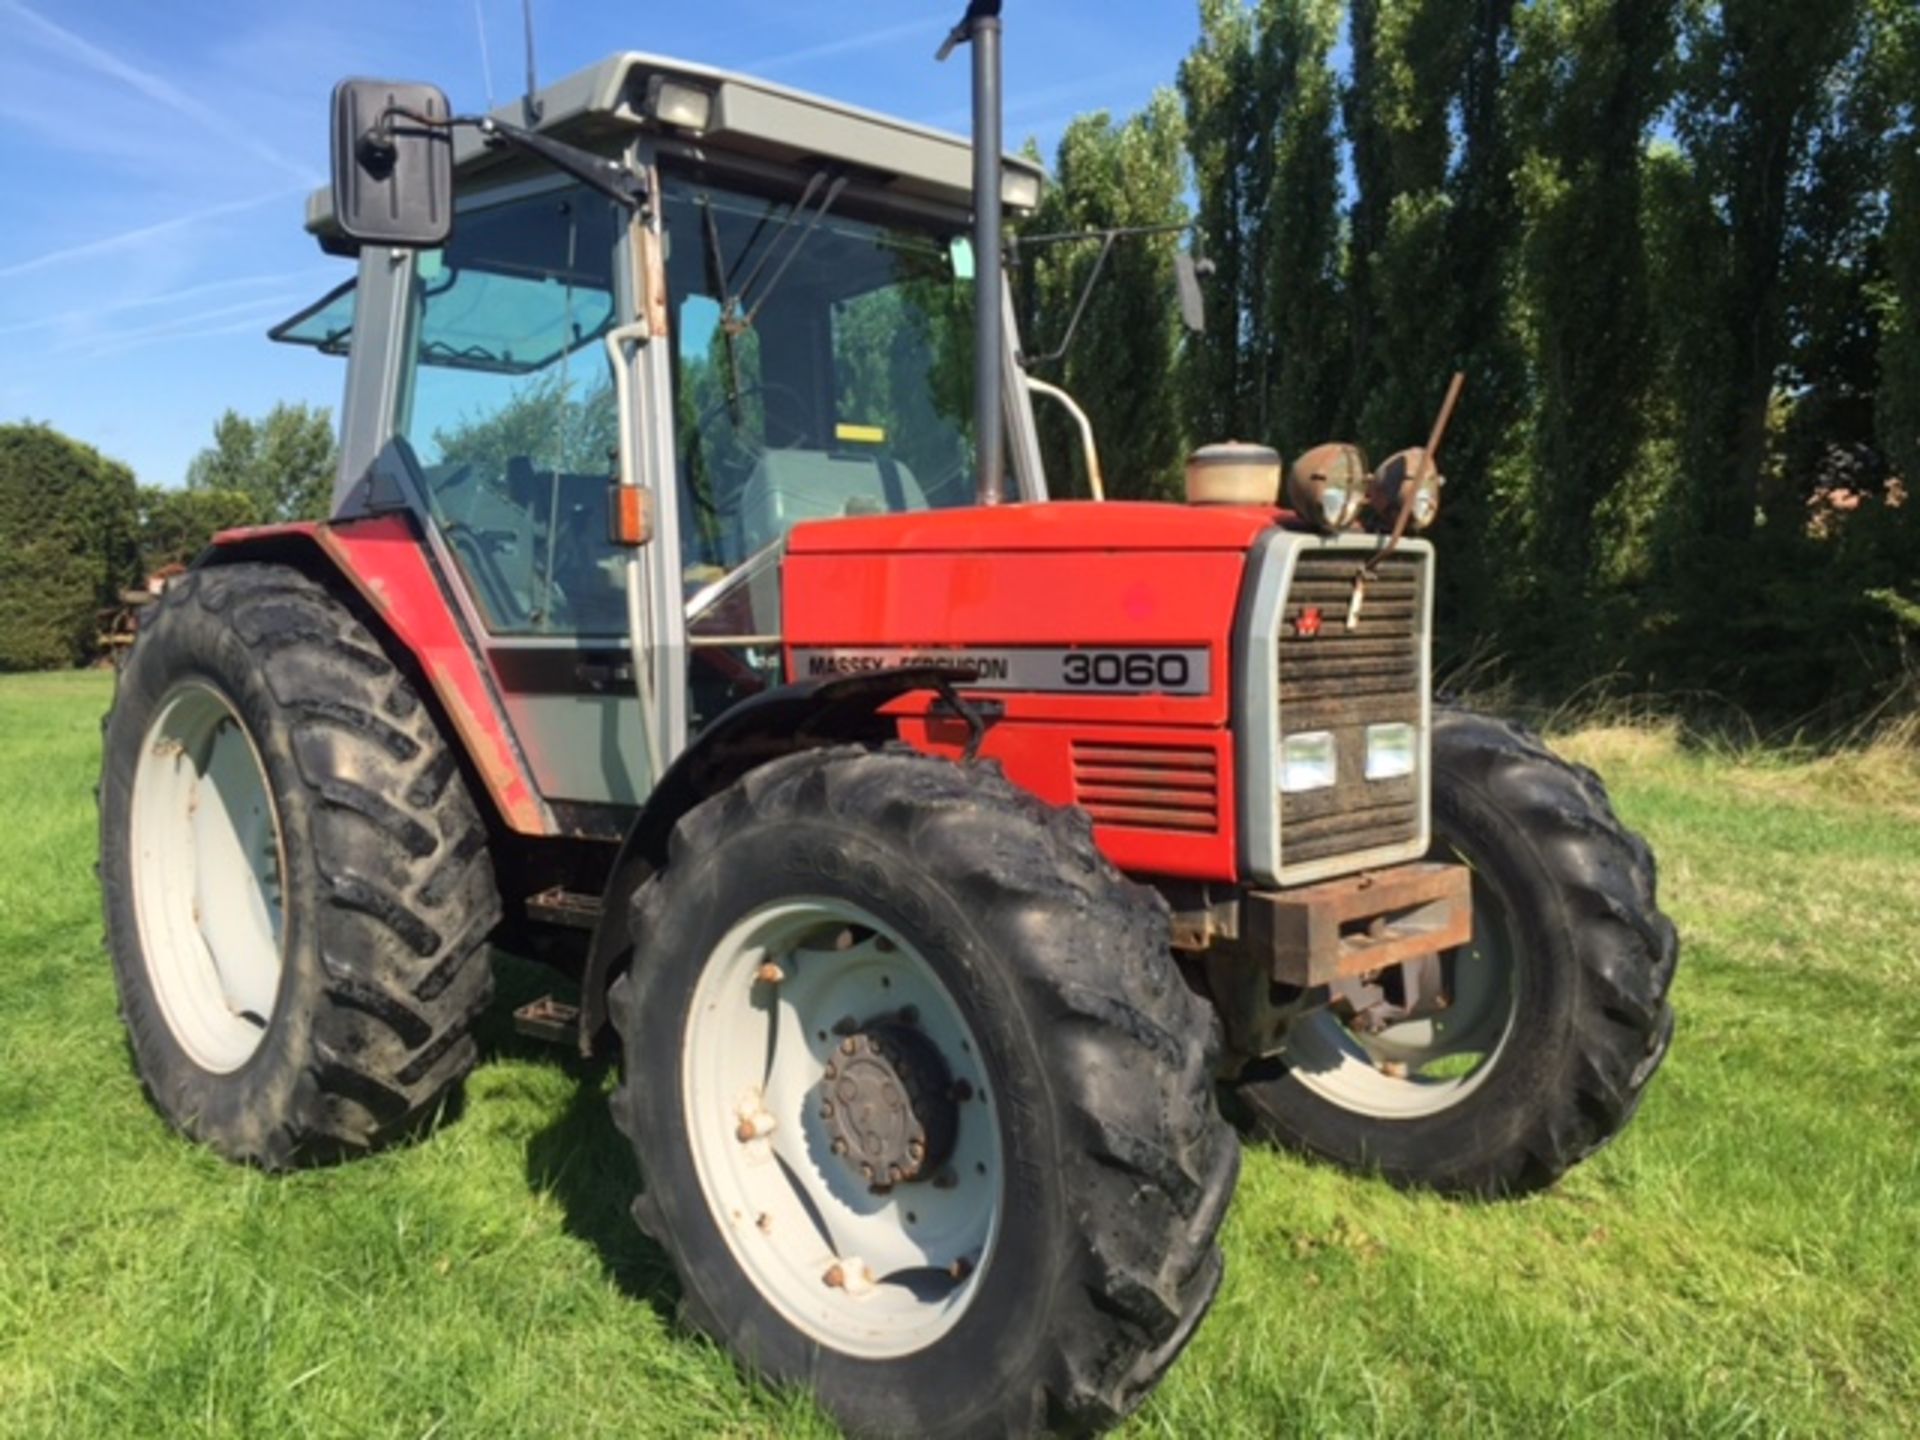 Massey Ferguson 3060 4wd Tractor with 16 Speed Gearbox & Air Con. V5 will be supplied. Reg. No. L352 - Image 2 of 4